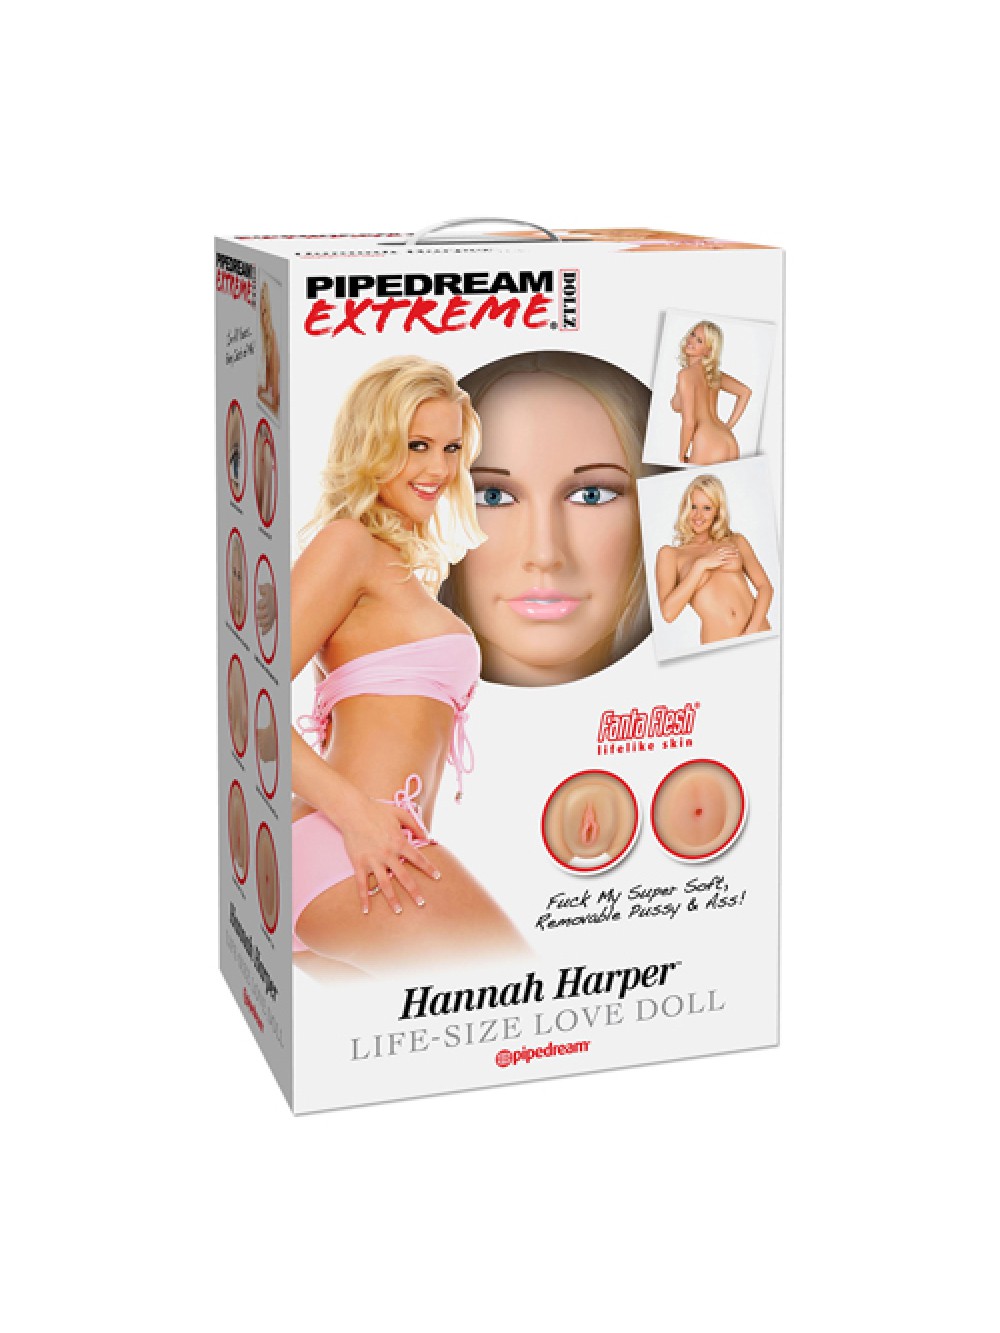 BAMBOLA PIPEDREAM EXTREME DOLLZ HANNAH HARPER LIFE-SIZE LOVE DOLL